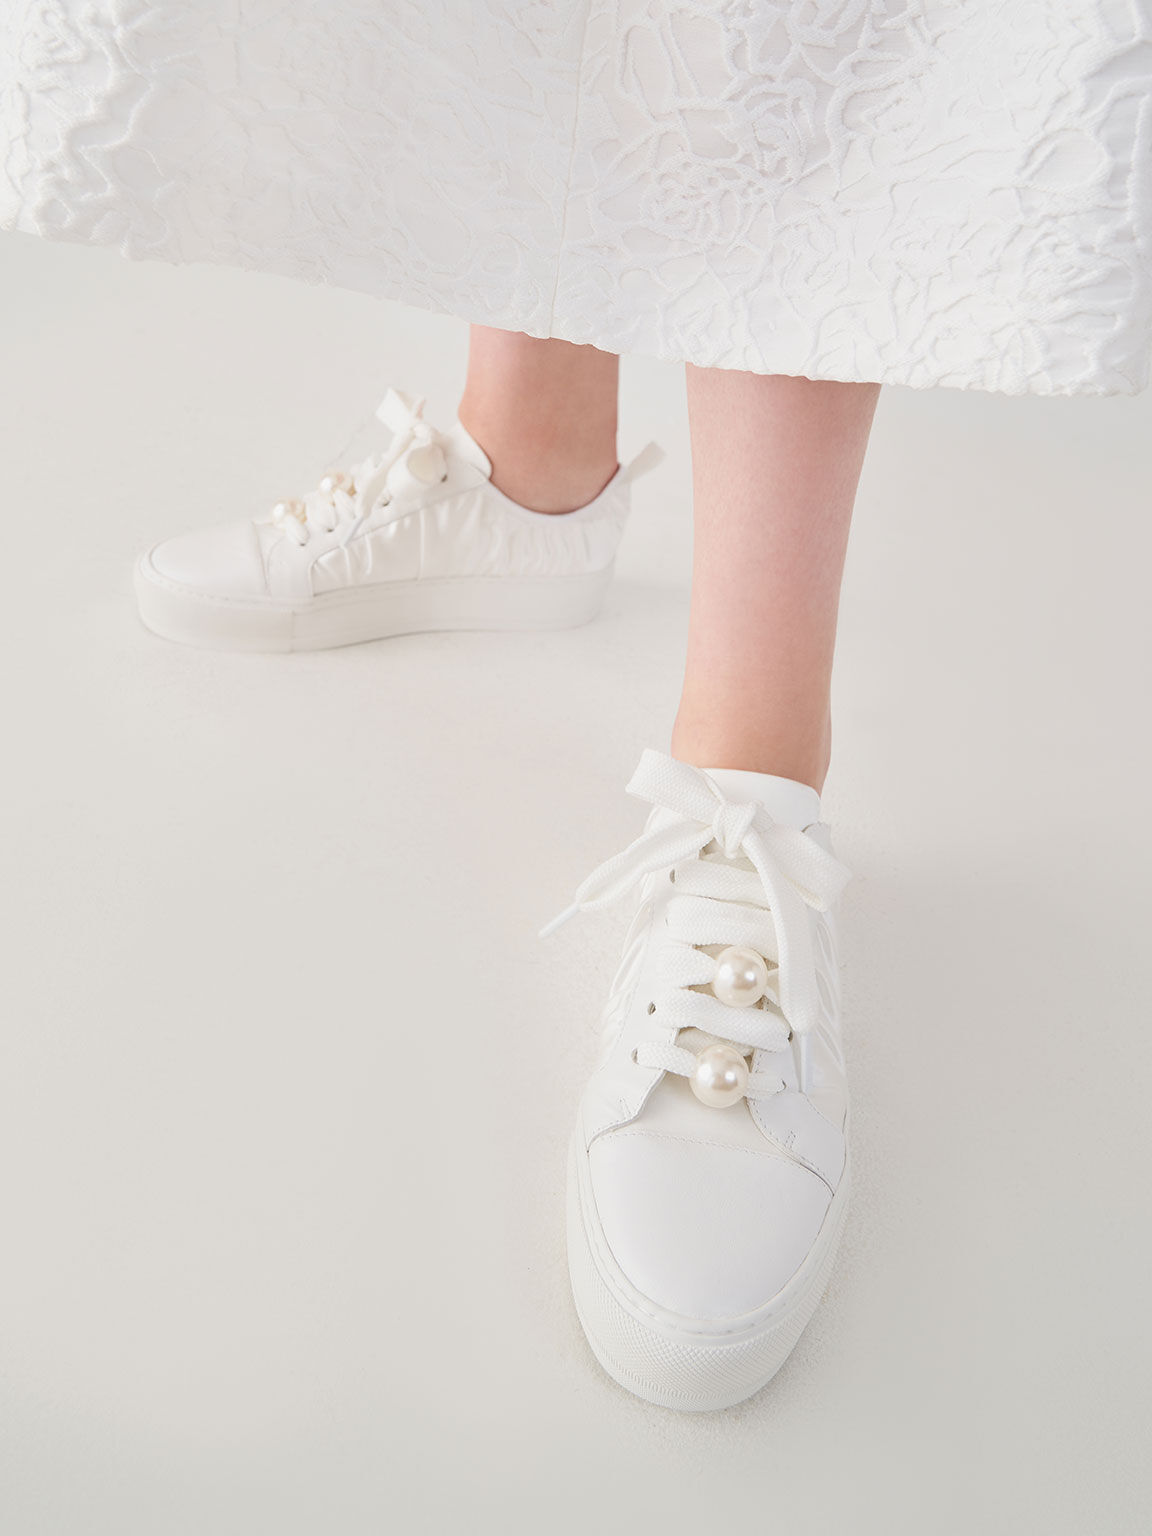 The Bridal Collection: Sneakers Blythe Leather & Satin Bead-Embellished, White, hi-res